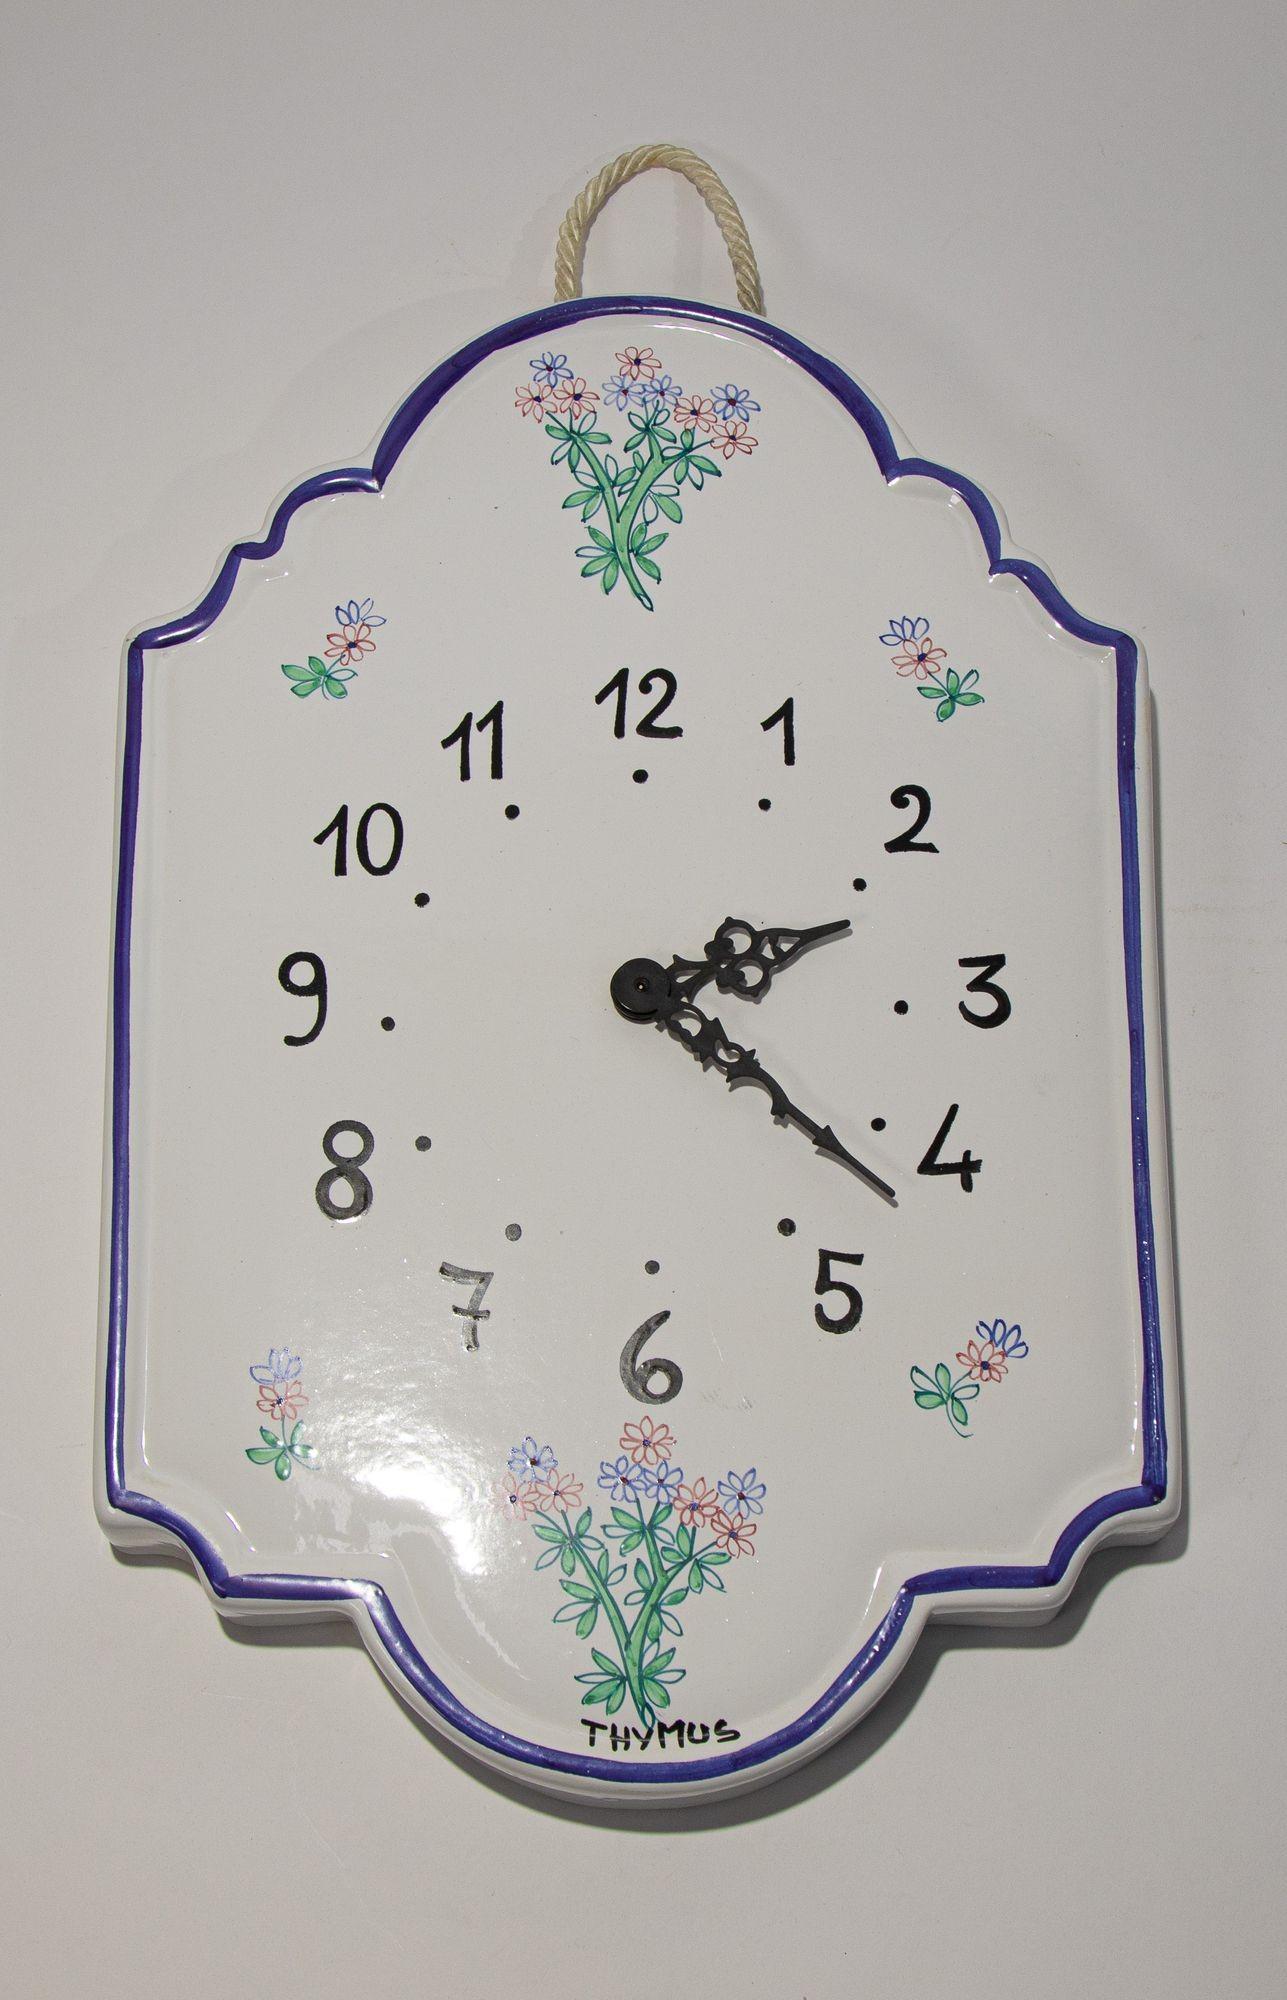 Hand Painted Ceramic Wall Clock with Thymus Design, Italy 7